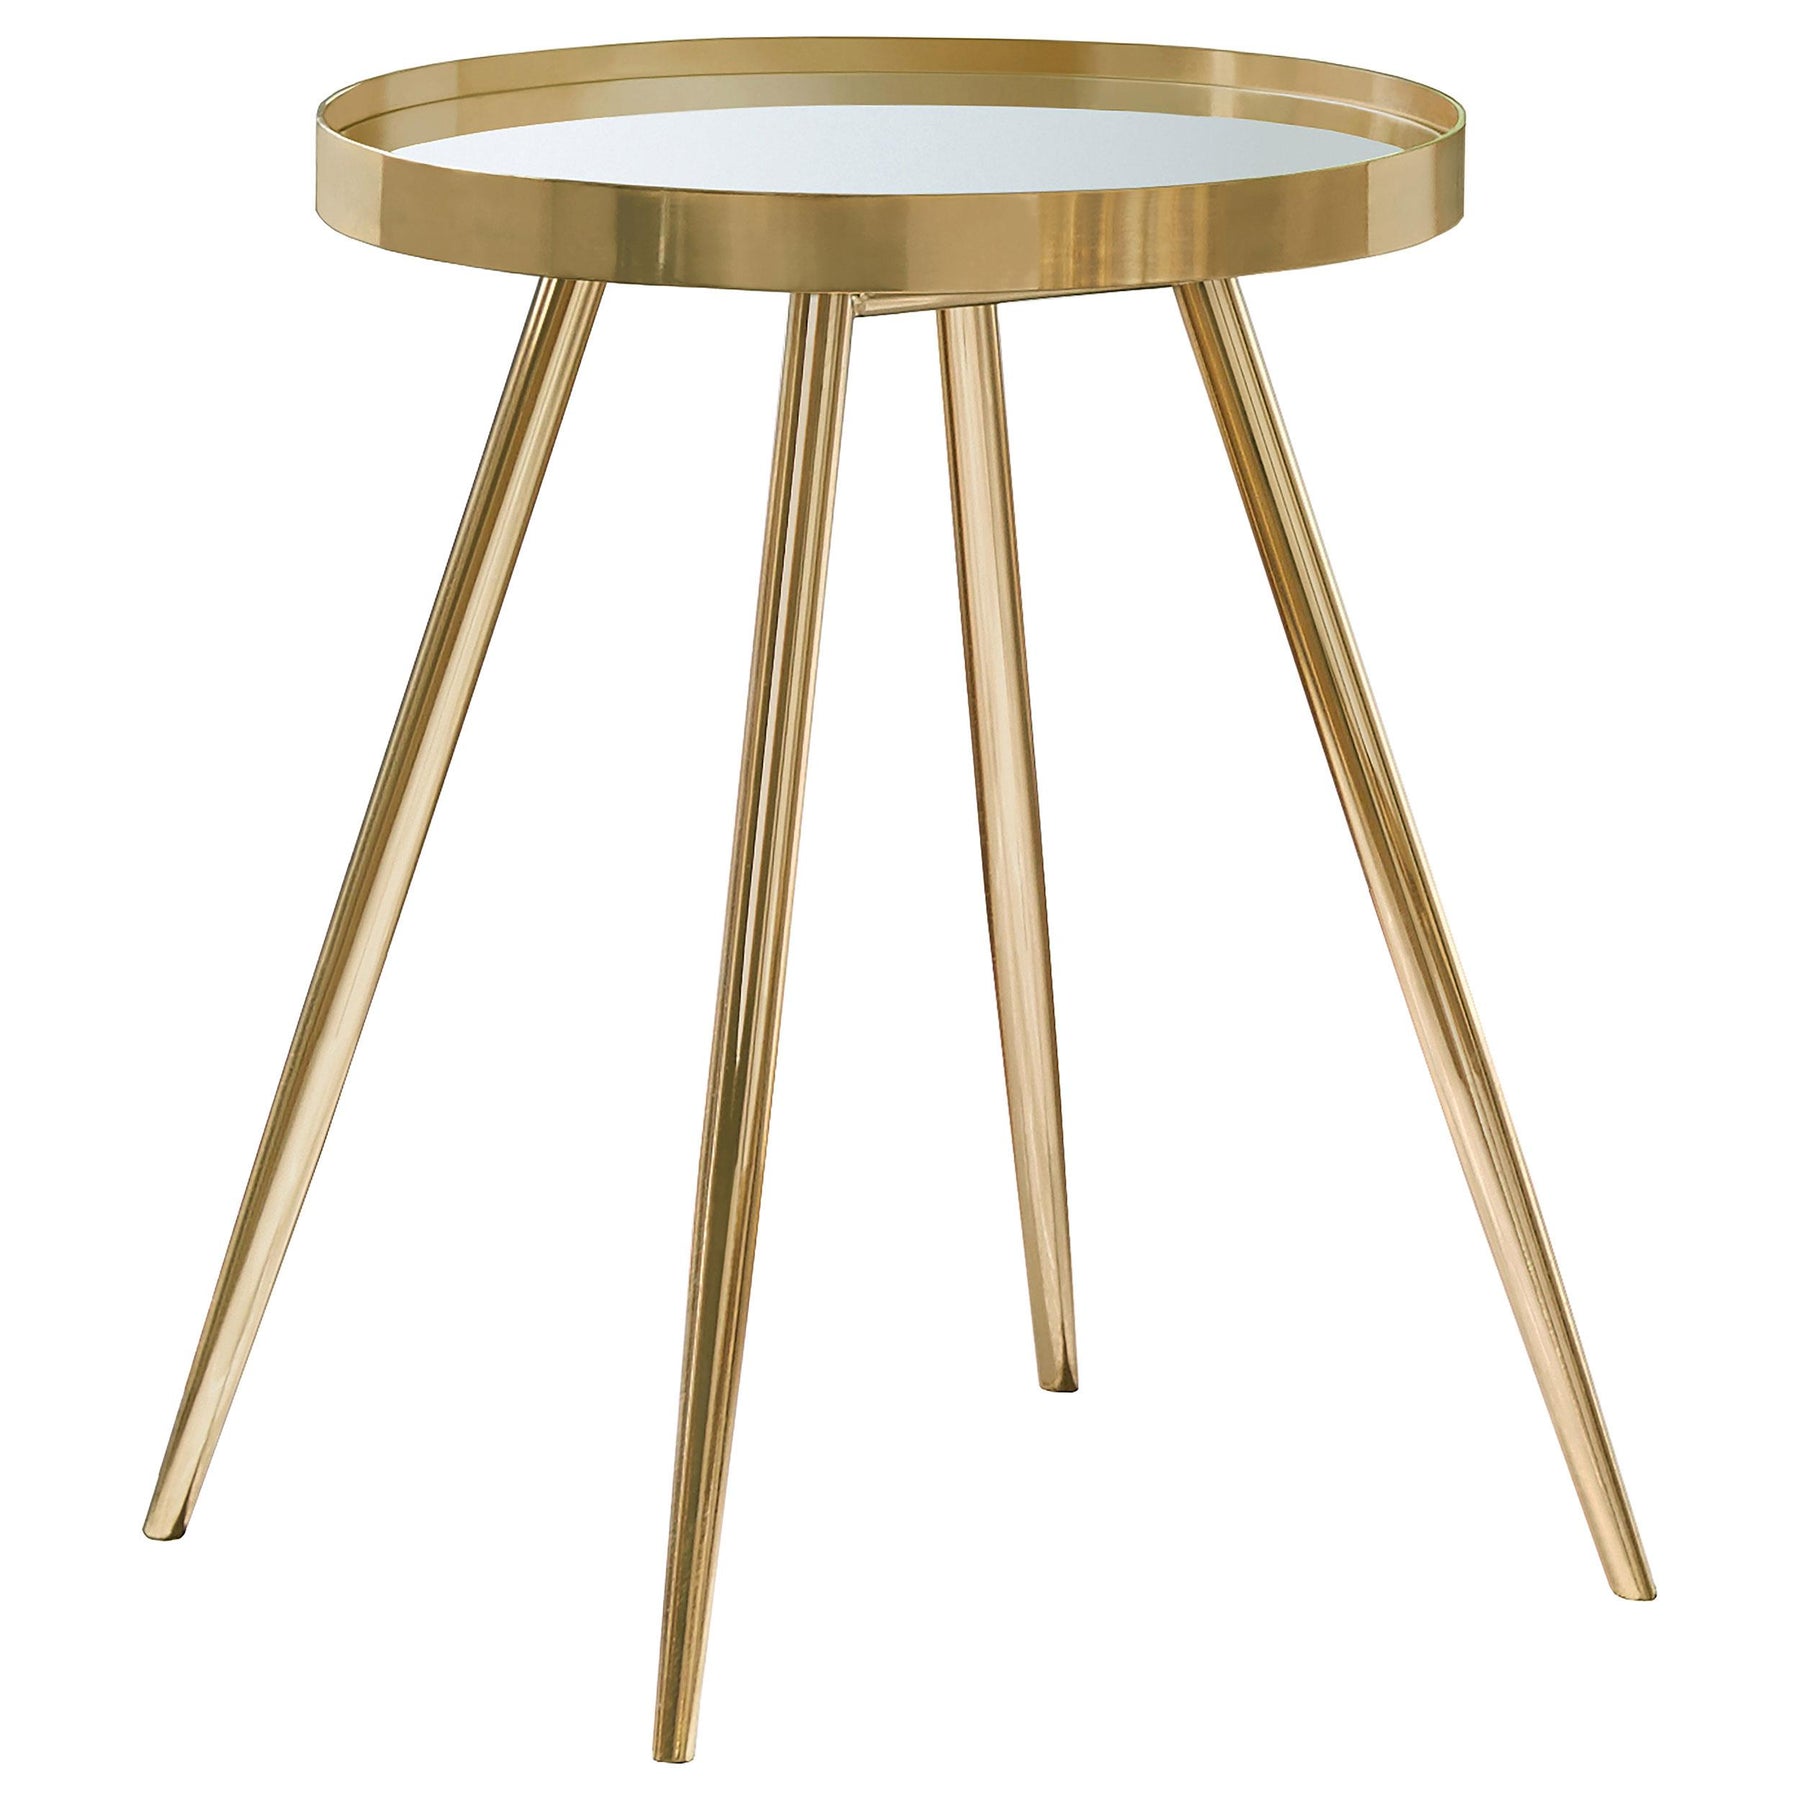 Kaelyn Round Mirror Top End Table Gold Kaelyn Round Mirror Top End Table Gold Half Price Furniture